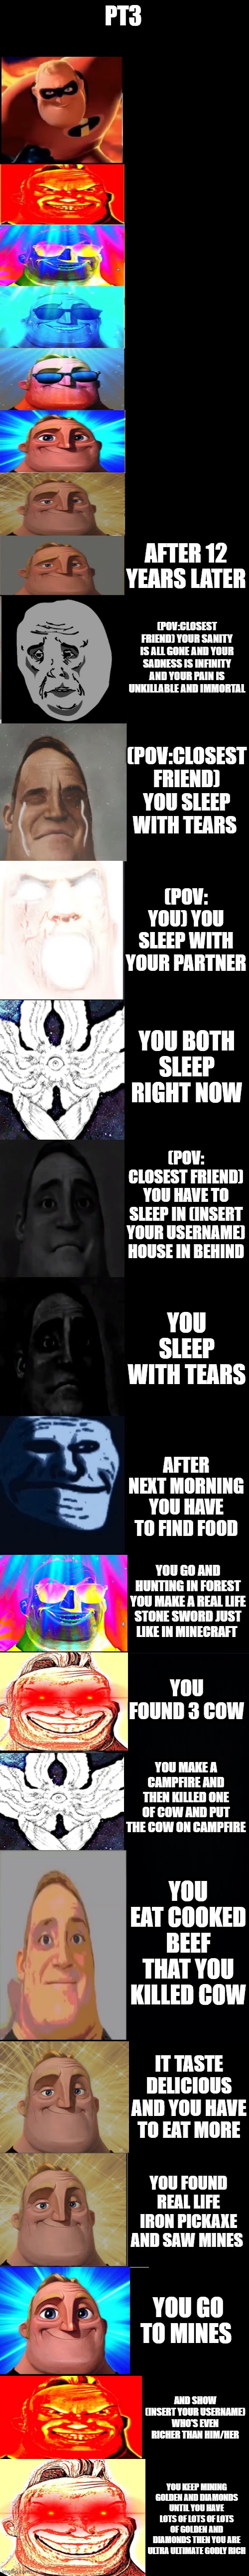 mr incredible becoming sad/canny part 3 | PT3; AFTER 12 YEARS LATER; (POV:CLOSEST FRIEND) YOUR SANITY IS ALL GONE AND YOUR SADNESS IS INFINITY AND YOUR PAIN IS UNKILLABLE AND IMMORTAL; (POV:CLOSEST FRIEND) YOU SLEEP WITH TEARS; (POV: YOU) YOU SLEEP WITH YOUR PARTNER; YOU BOTH SLEEP RIGHT NOW; (POV: CLOSEST FRIEND) YOU HAVE TO SLEEP IN (INSERT YOUR USERNAME) HOUSE IN BEHIND; YOU SLEEP WITH TEARS; AFTER NEXT MORNING YOU HAVE TO FIND FOOD; YOU GO AND HUNTING IN FOREST YOU MAKE A REAL LIFE STONE SWORD JUST LIKE IN MINECRAFT; YOU FOUND 3 COW; YOU MAKE A CAMPFIRE AND THEN KILLED ONE OF COW AND PUT THE COW ON CAMPFIRE; YOU EAT COOKED BEEF THAT YOU KILLED COW; IT TASTE DELICIOUS AND YOU HAVE TO EAT MORE; YOU FOUND REAL LIFE IRON PICKAXE AND SAW MINES; YOU GO TO MINES; AND SHOW (INSERT YOUR USERNAME) WHO'S EVEN RICHER THAN HIM/HER; YOU KEEP MINING GOLDEN AND DIAMONDS UNTIL YOU HAVE LOTS OF LOTS OF LOTS OF GOLDEN AND DIAMONDS THEN YOU ARE ULTRA ULTIMATE GODLY RICH | image tagged in mr incredible becoming sad 3rd extension | made w/ Imgflip meme maker